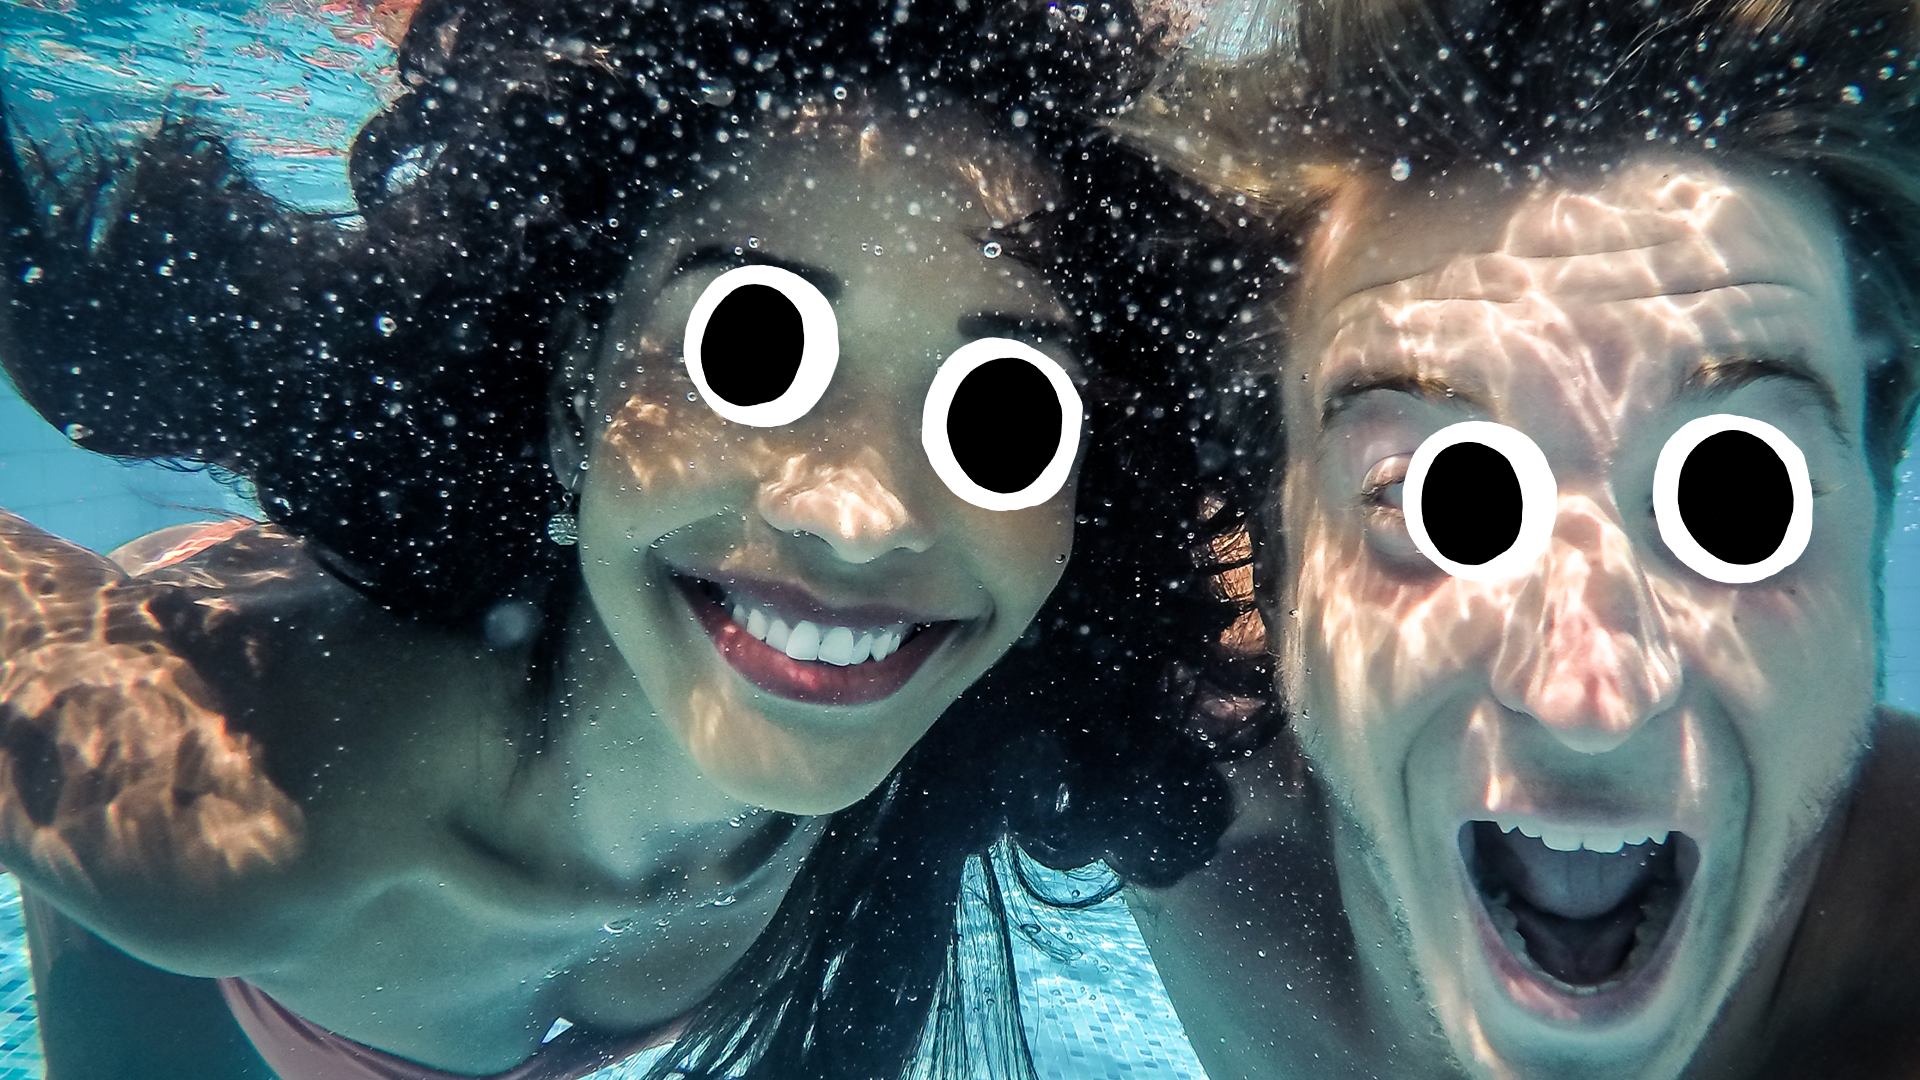 Man and woman underwater smiling at camera